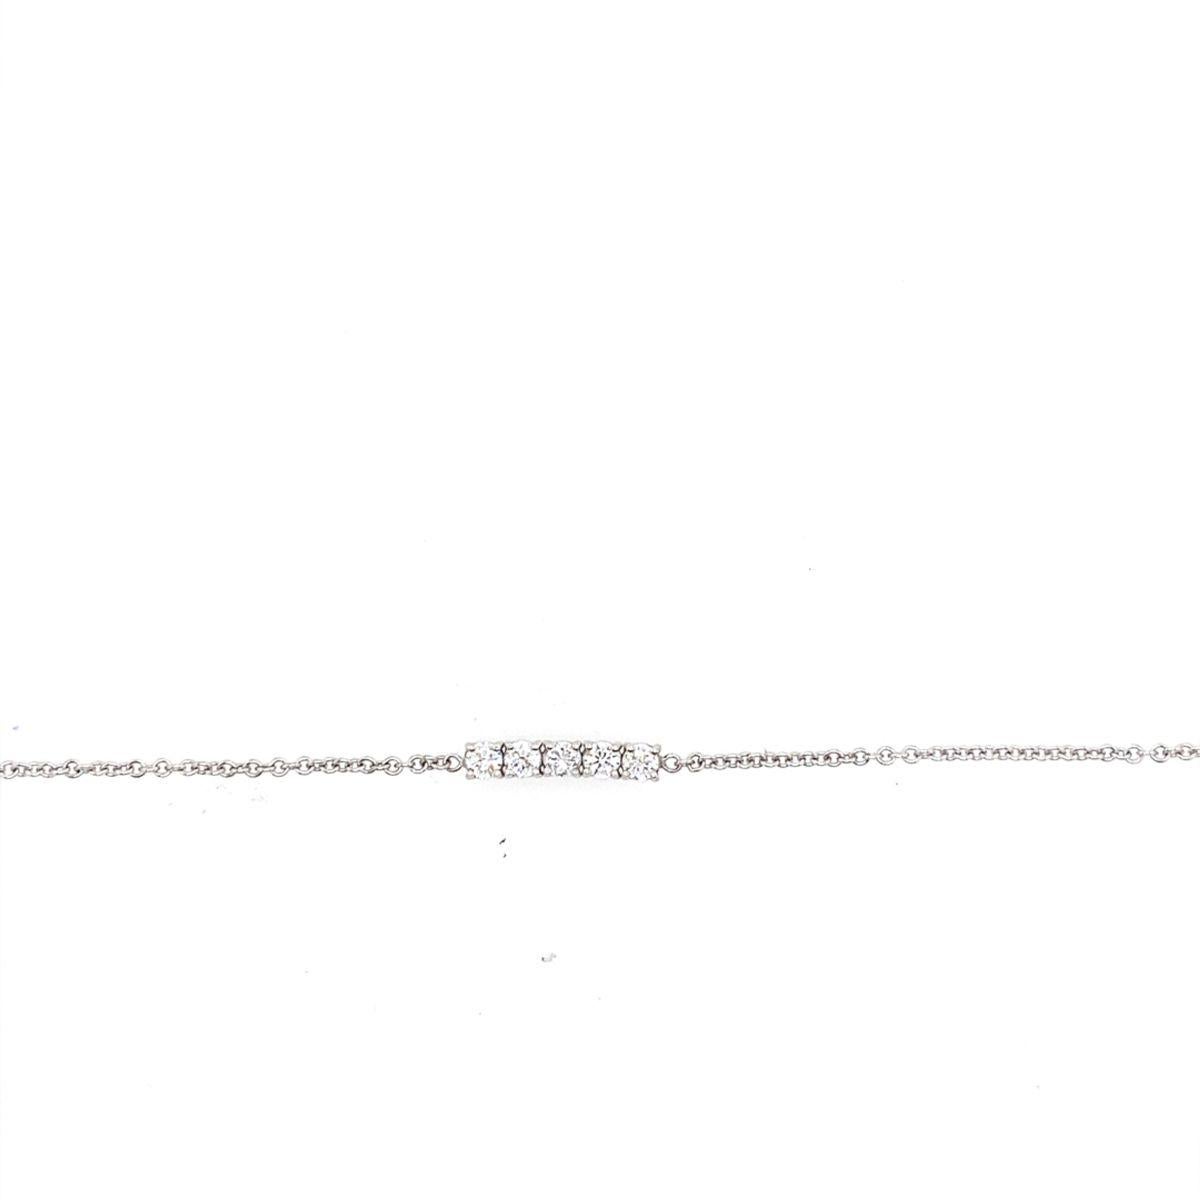 18ct White Gold Tennis/Chain Bracelet, Set With 4 Round Brilliant Cut Diamonds

Additional Information:
Total Diamond Weight: 0.50ct
Diamond Colour: G/H
Diamond Clarity: SI1
Total Weight: 2.6g
Diamond Head Size: L 14.85 mm x W 3.45mm
SMS4939
